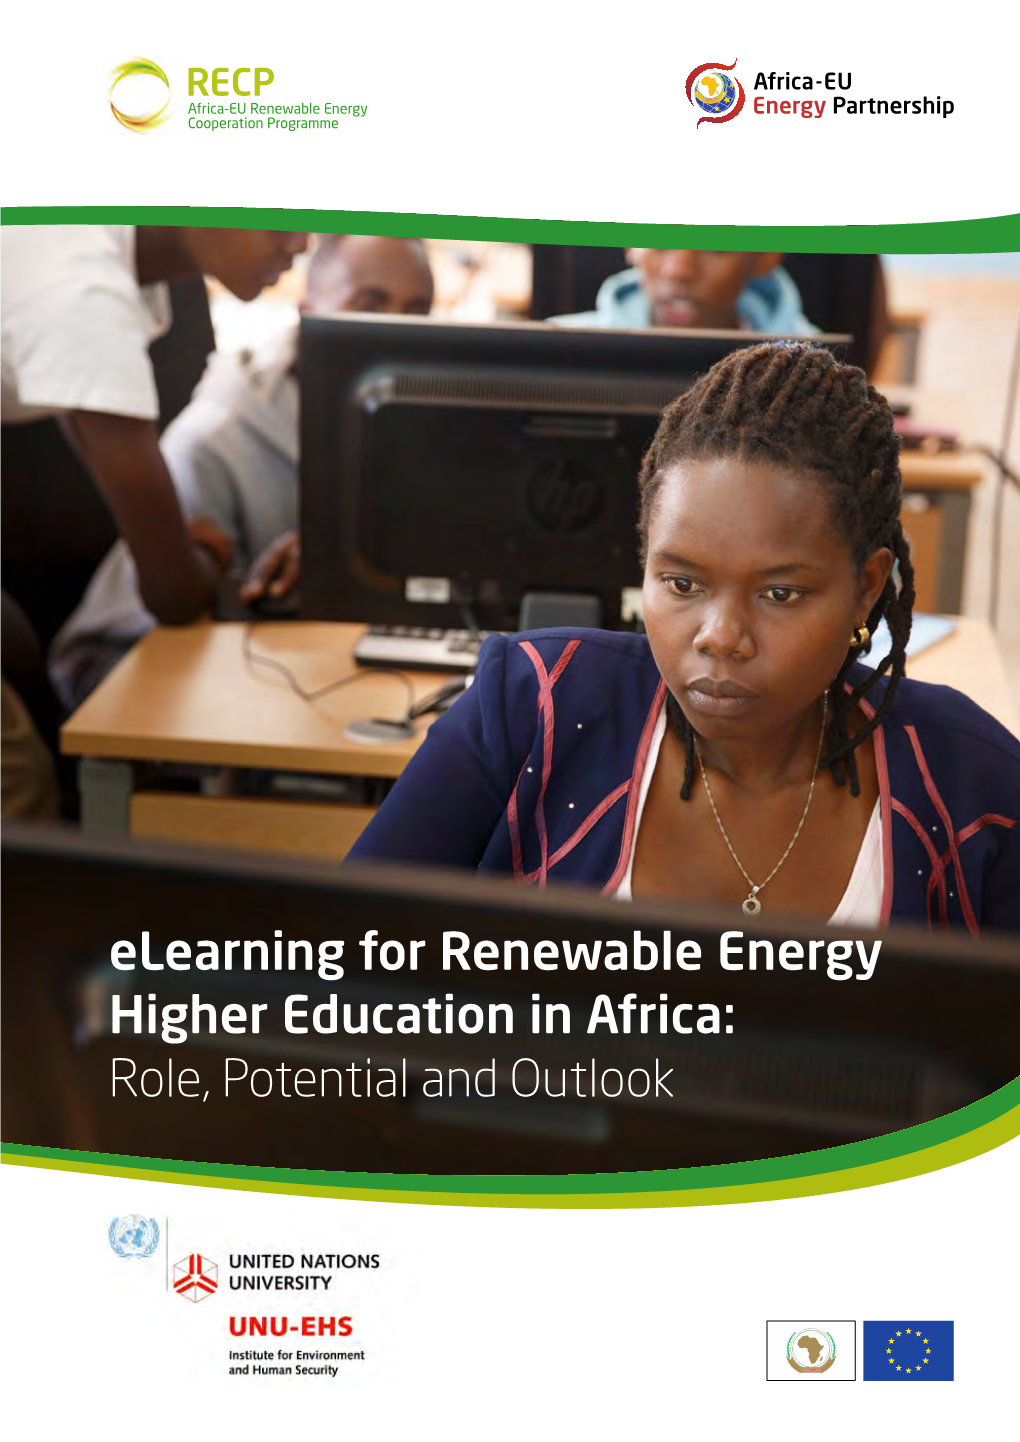 Elearning for Renewable Energy Higher Education in Africa